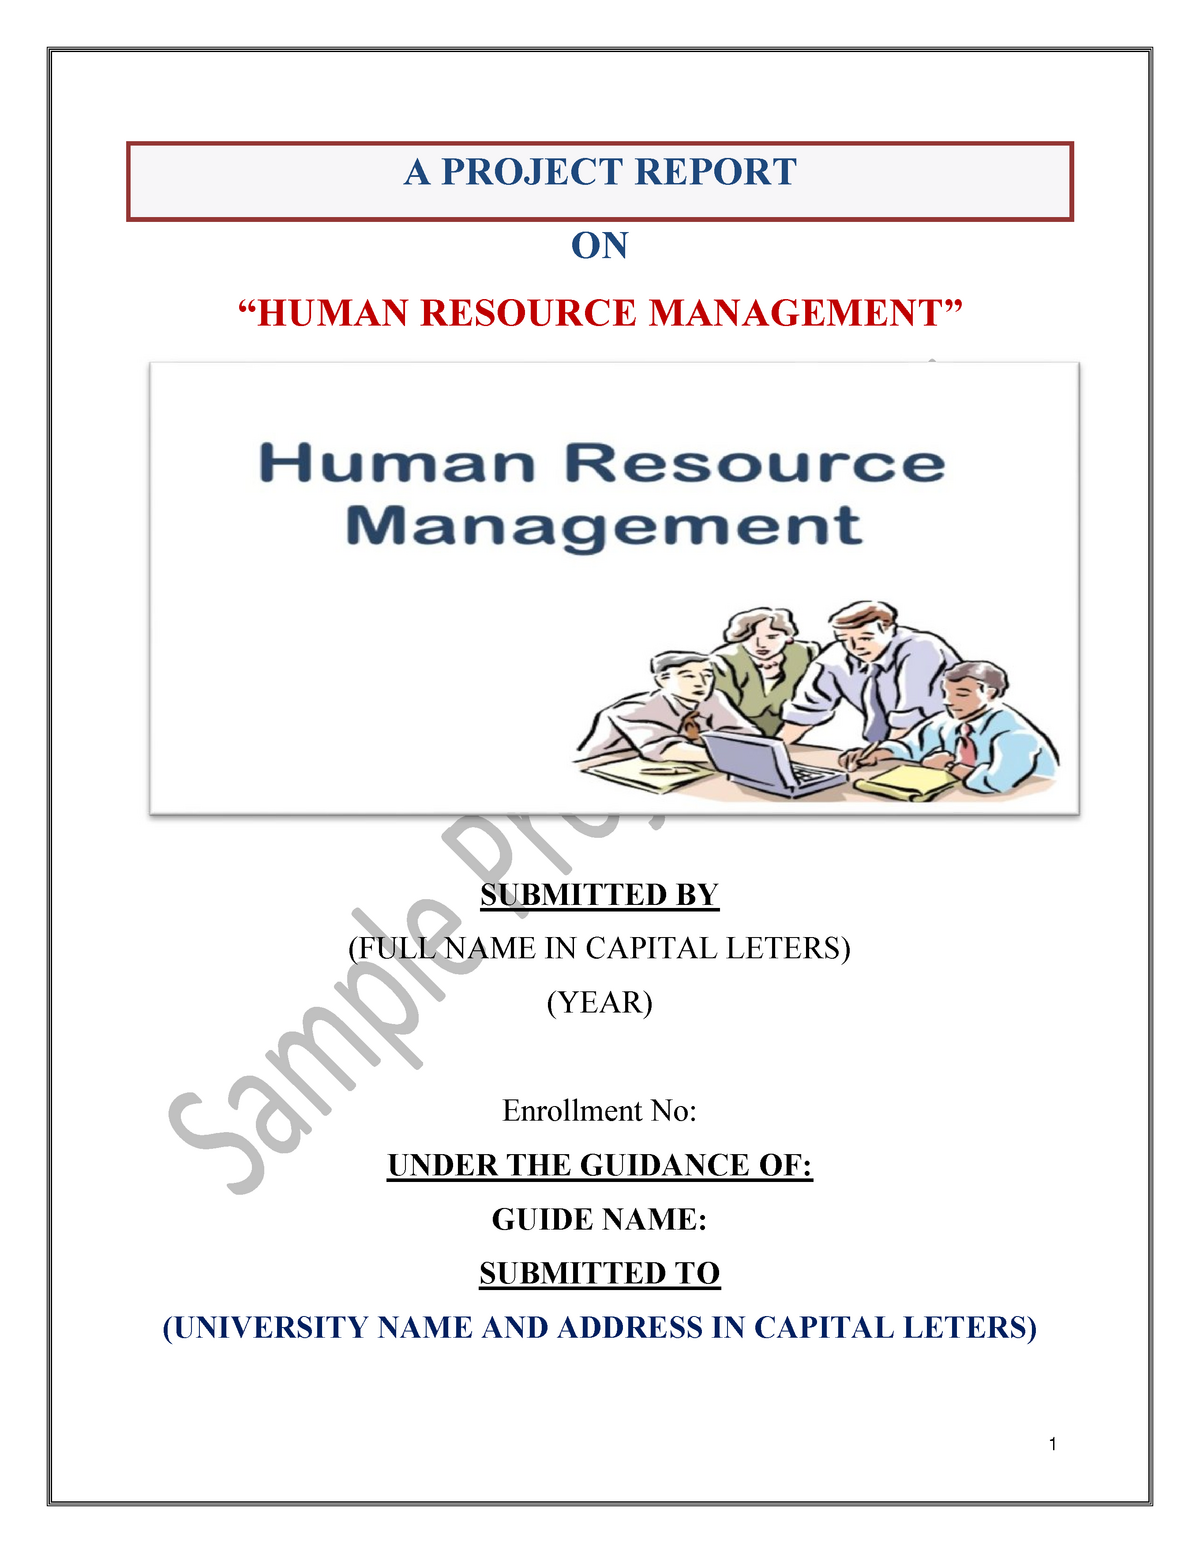 research projects on human resource management